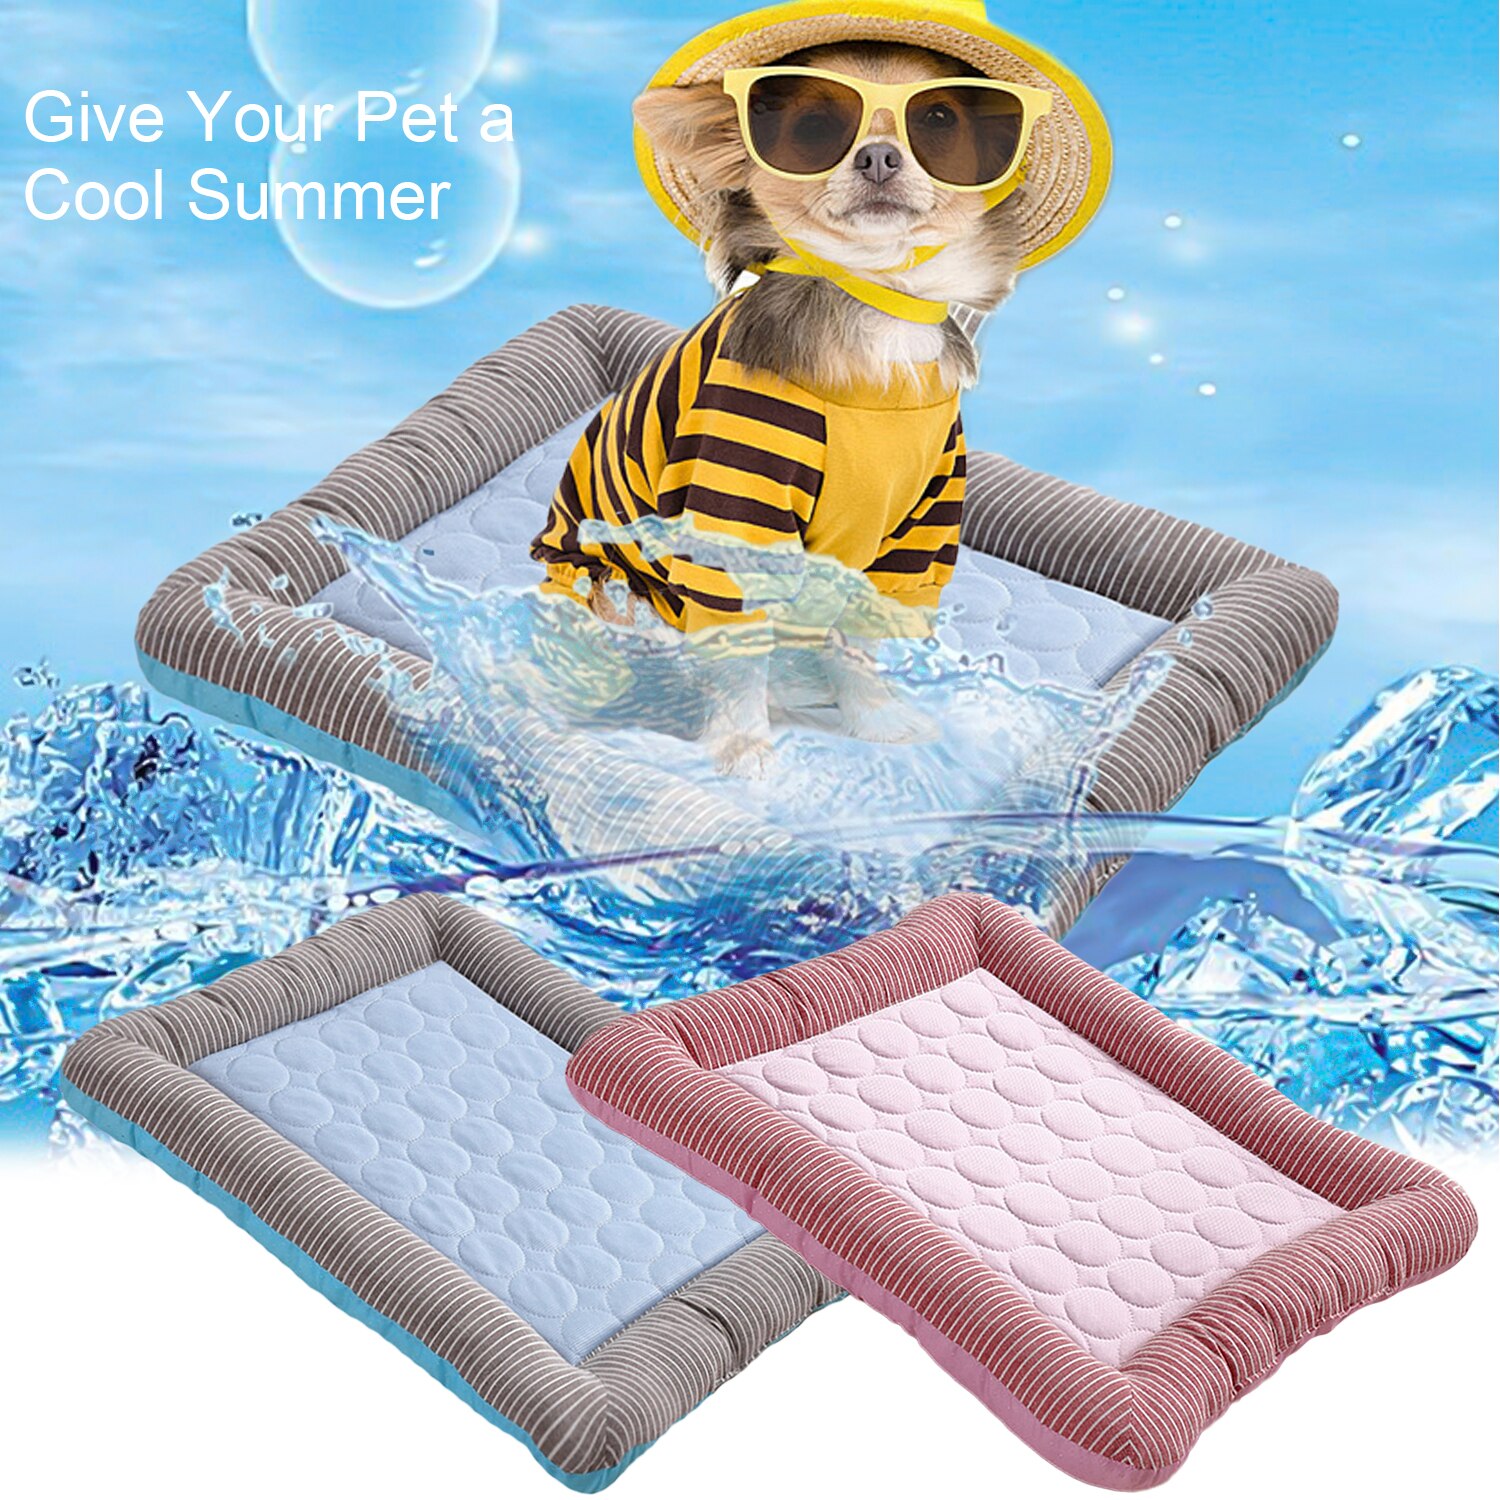 Hoopet Dog Cooling Bed Summer Breathable Sleeping Cool Ice Pad Mat Cushion for Small Pet Dog Cat Puppy 54 x 43cm